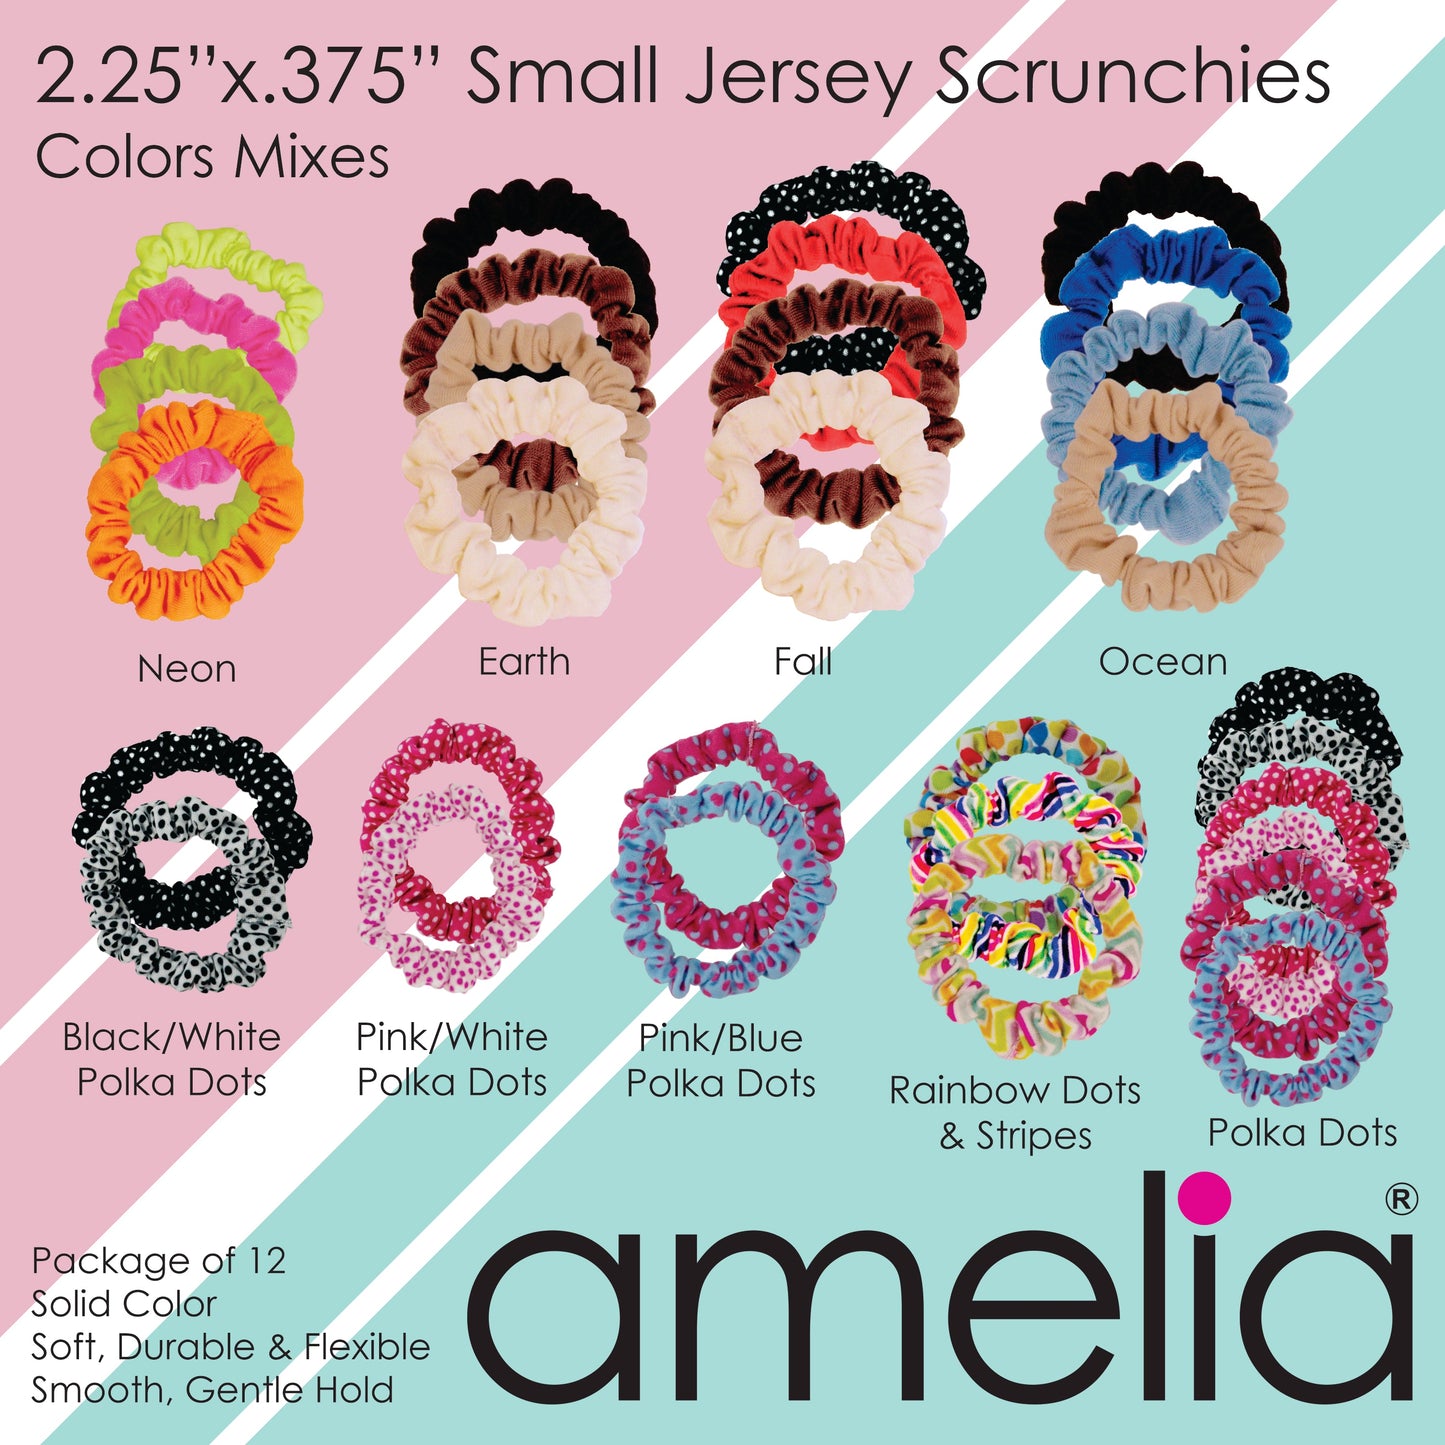 Amelia Beauty, Pink and Blue Polka Dot Mix Jersey Scrunchies, 2.25in Diameter, Gentle on Hair, Strong Hold, No Snag, No Dents or Creases. 12 Pack